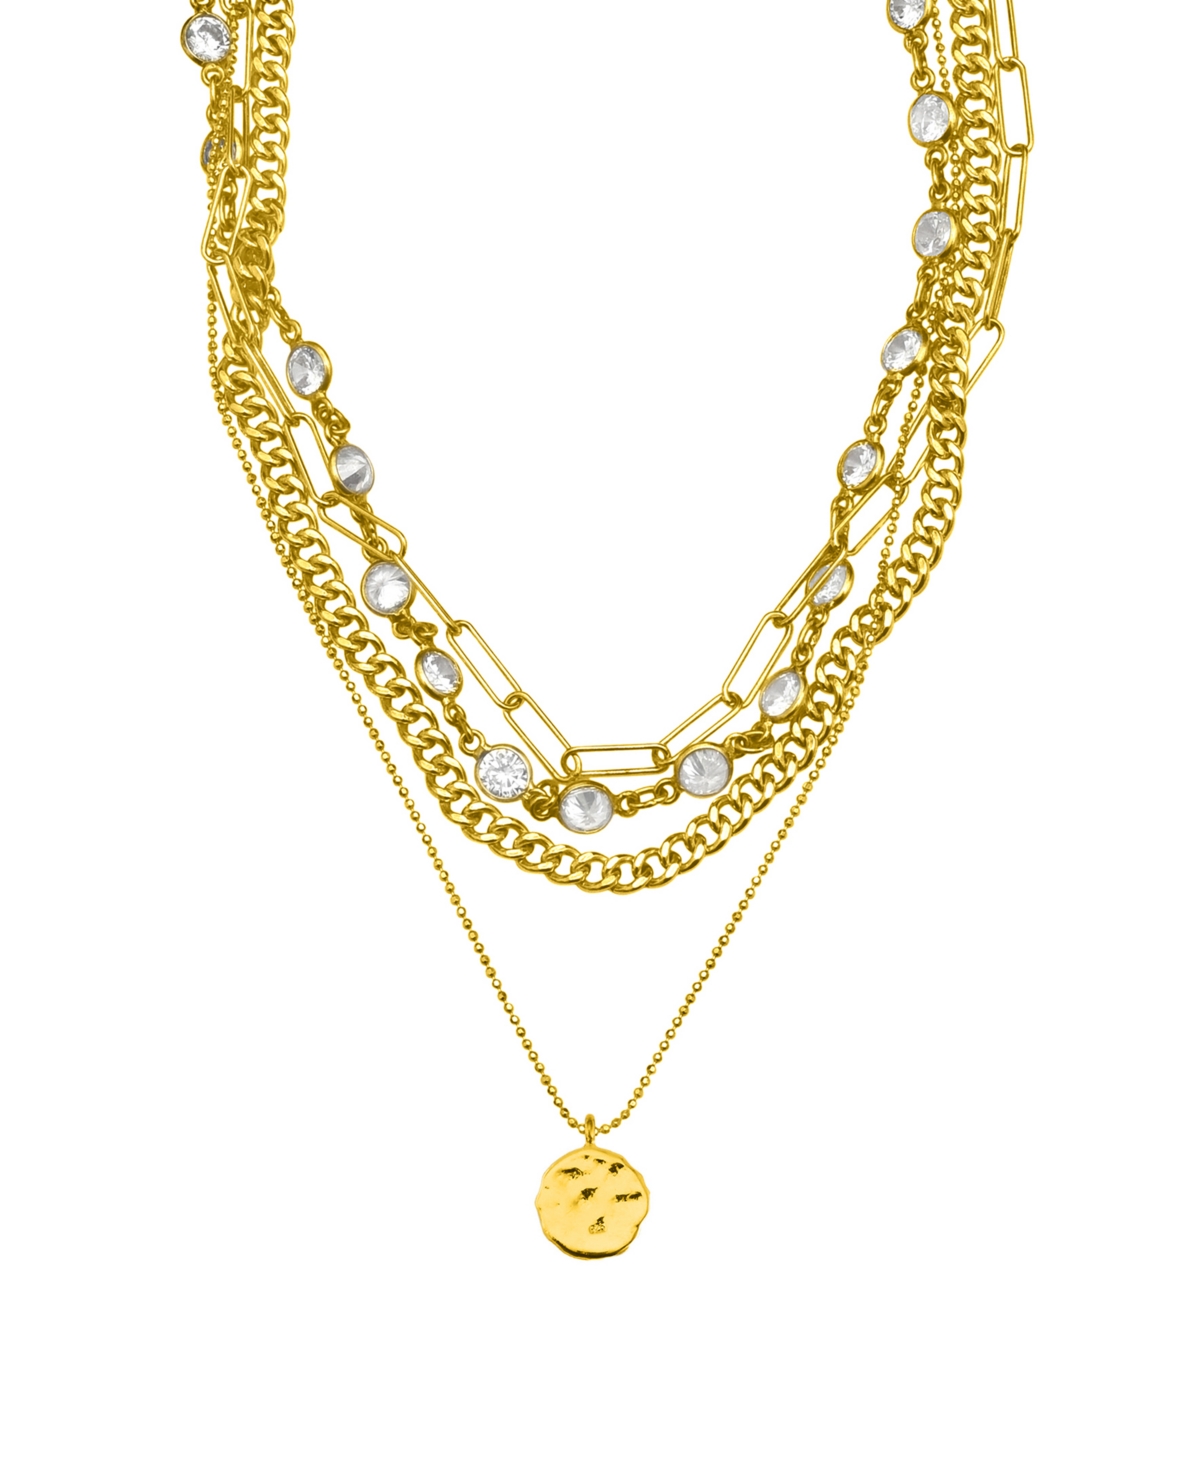 Necklace with Coin Charm - Yellow